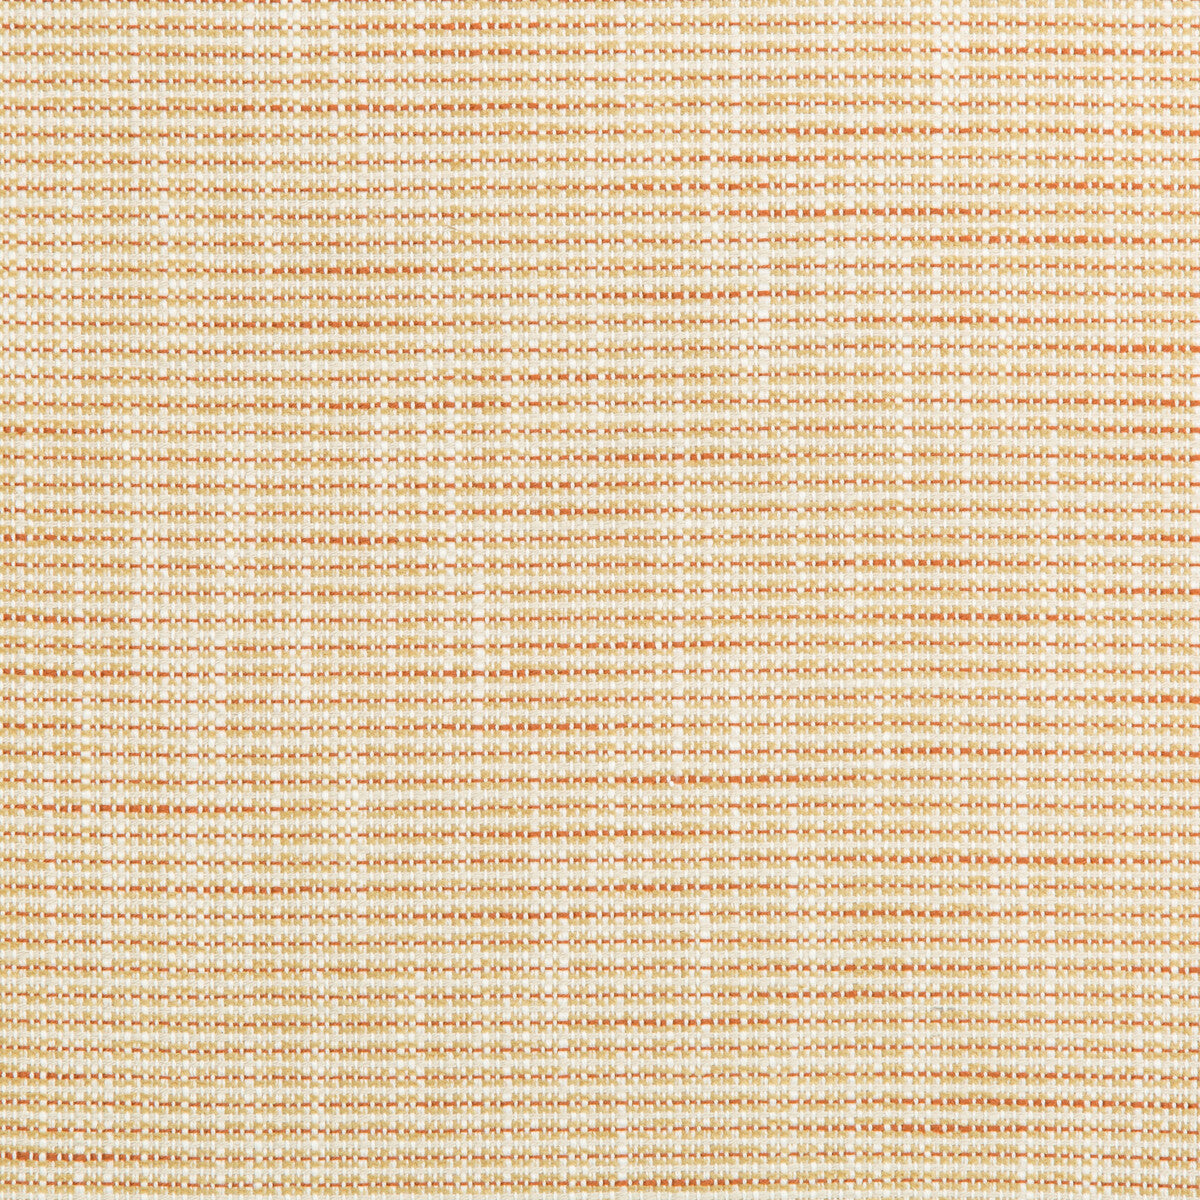 River Park fabric in butterscotch color - pattern 35866.1424.0 - by Kravet Contract in the Gis Crypton collection